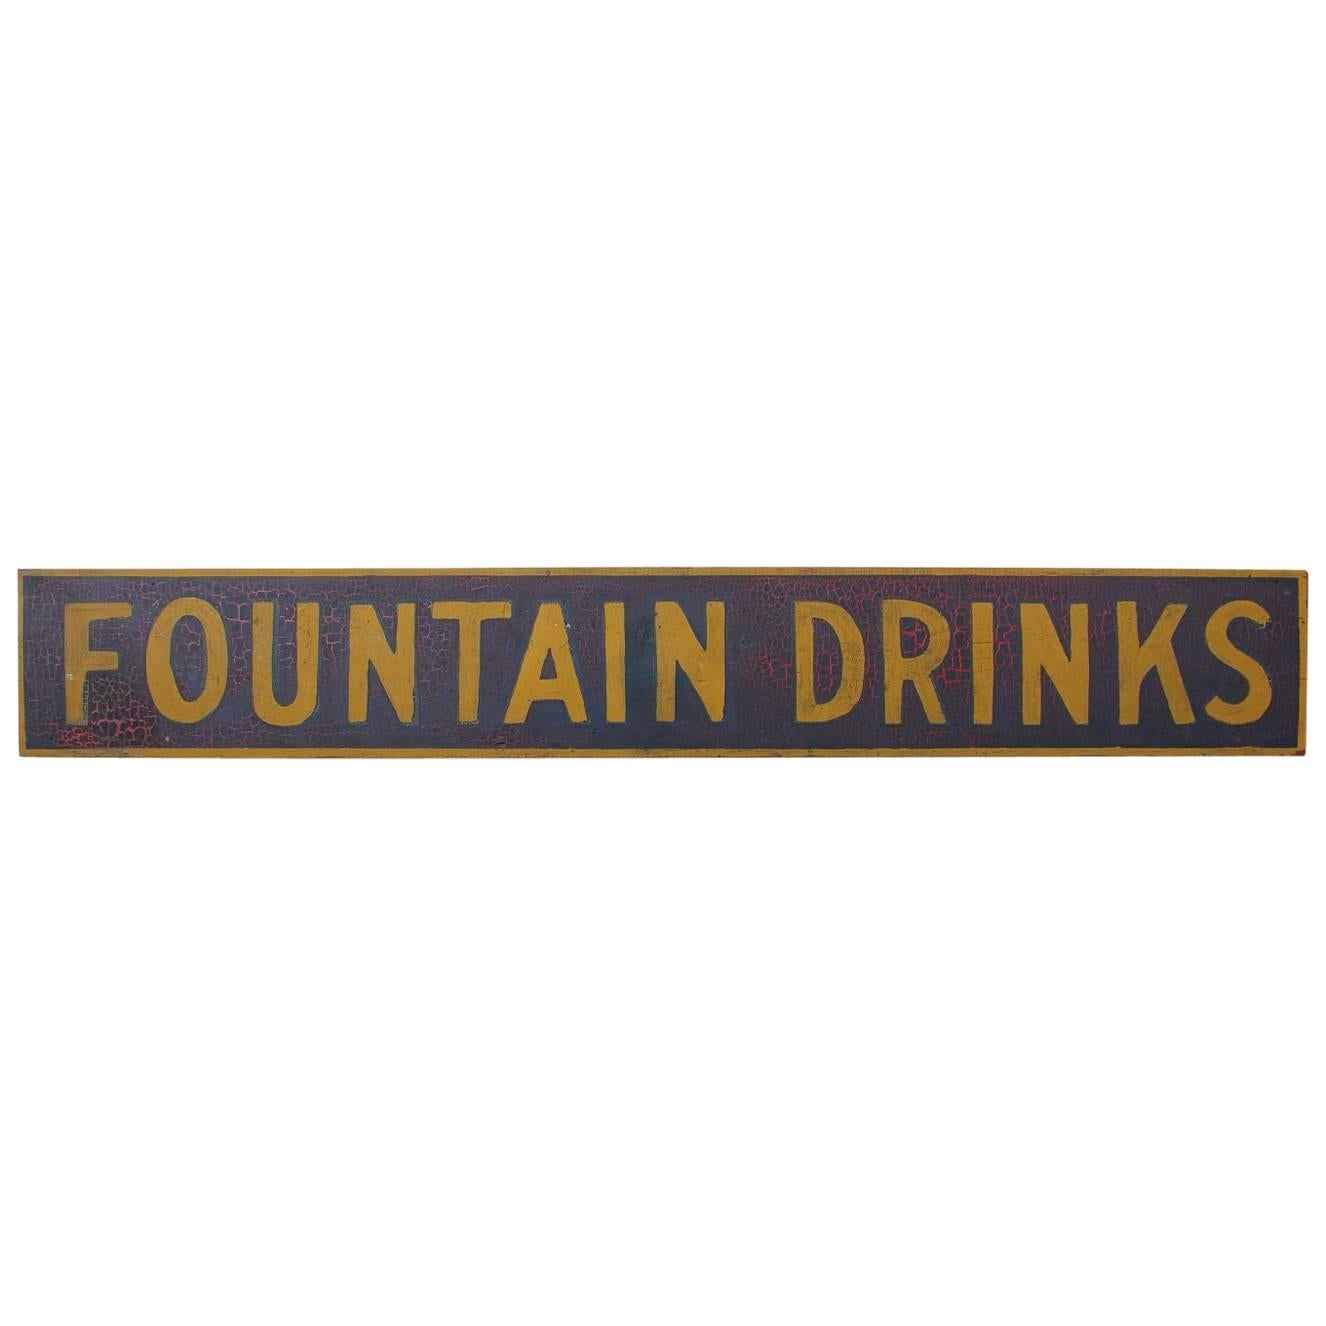 Late 19th Century Hand-Painted Wood Sign "Fountain Drinks"